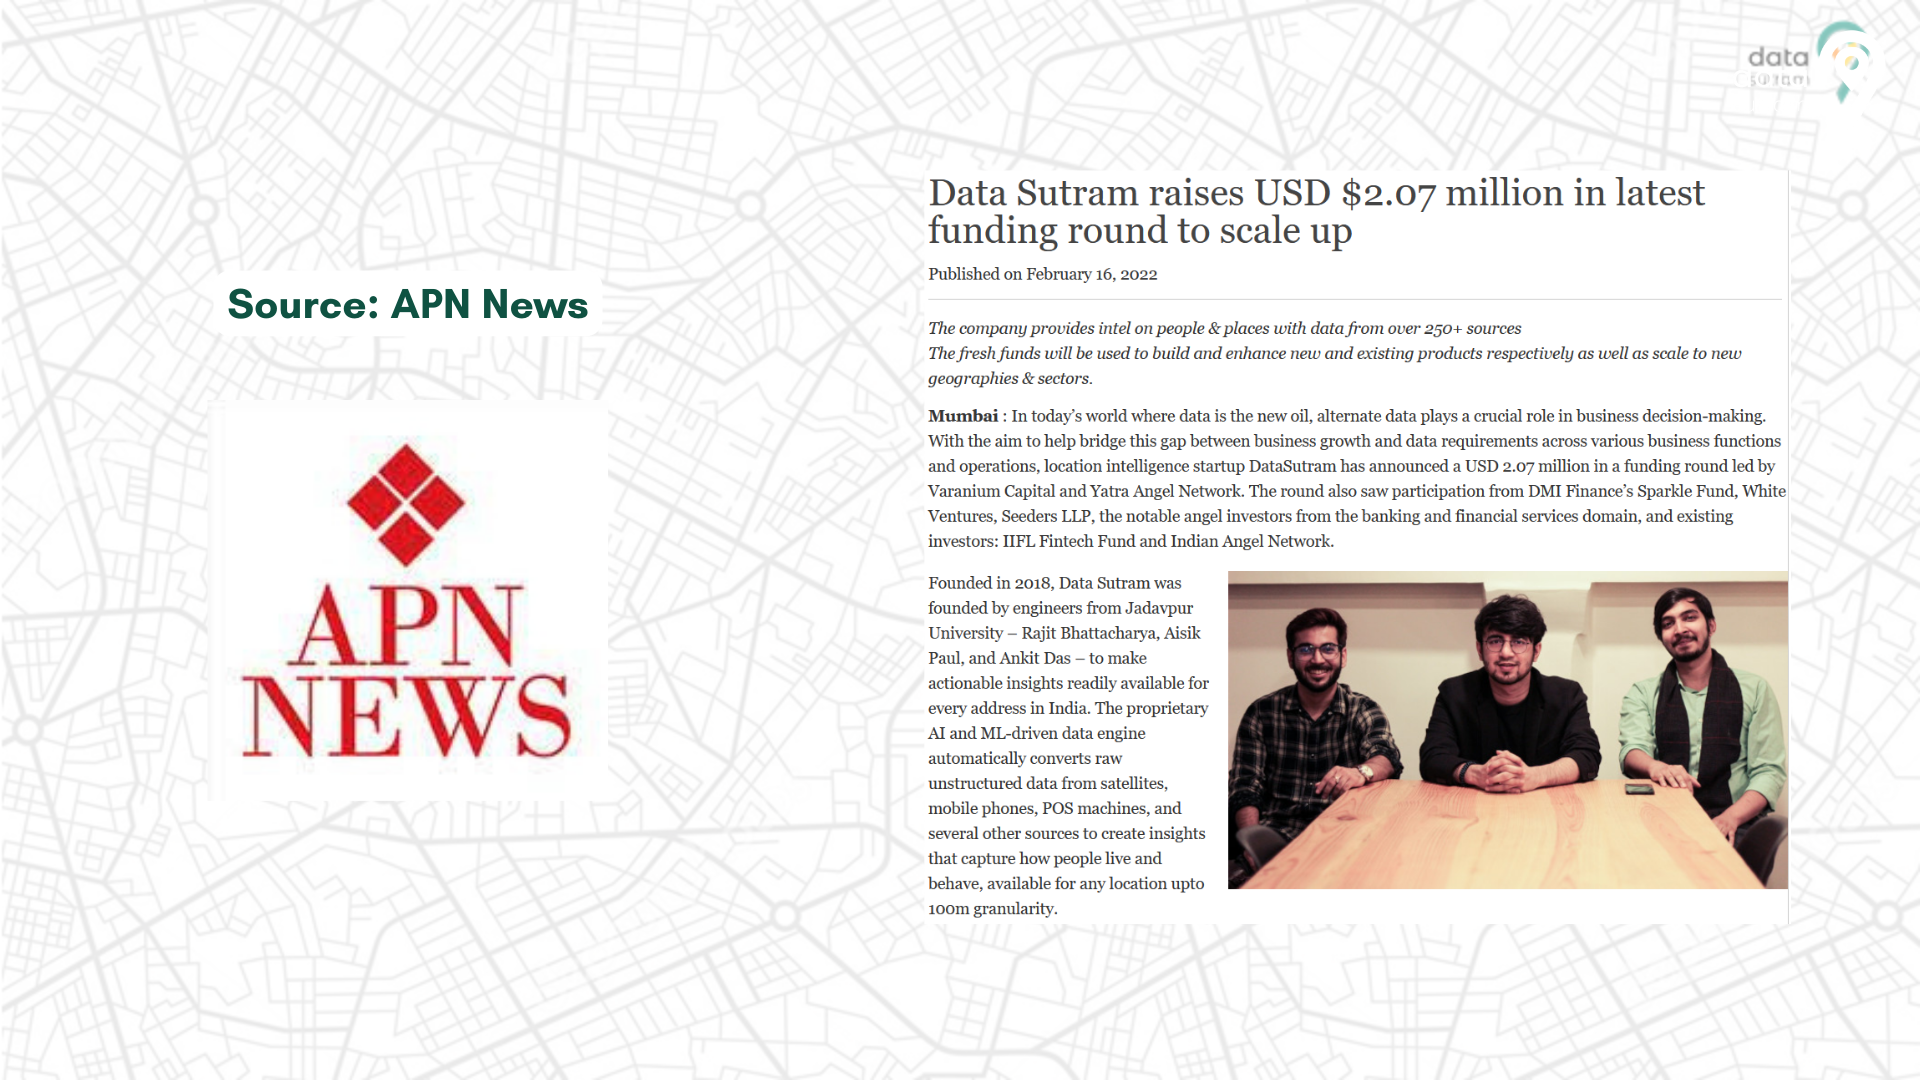 Data Sutram raises USD $2.07 million in latest funding round to scale up